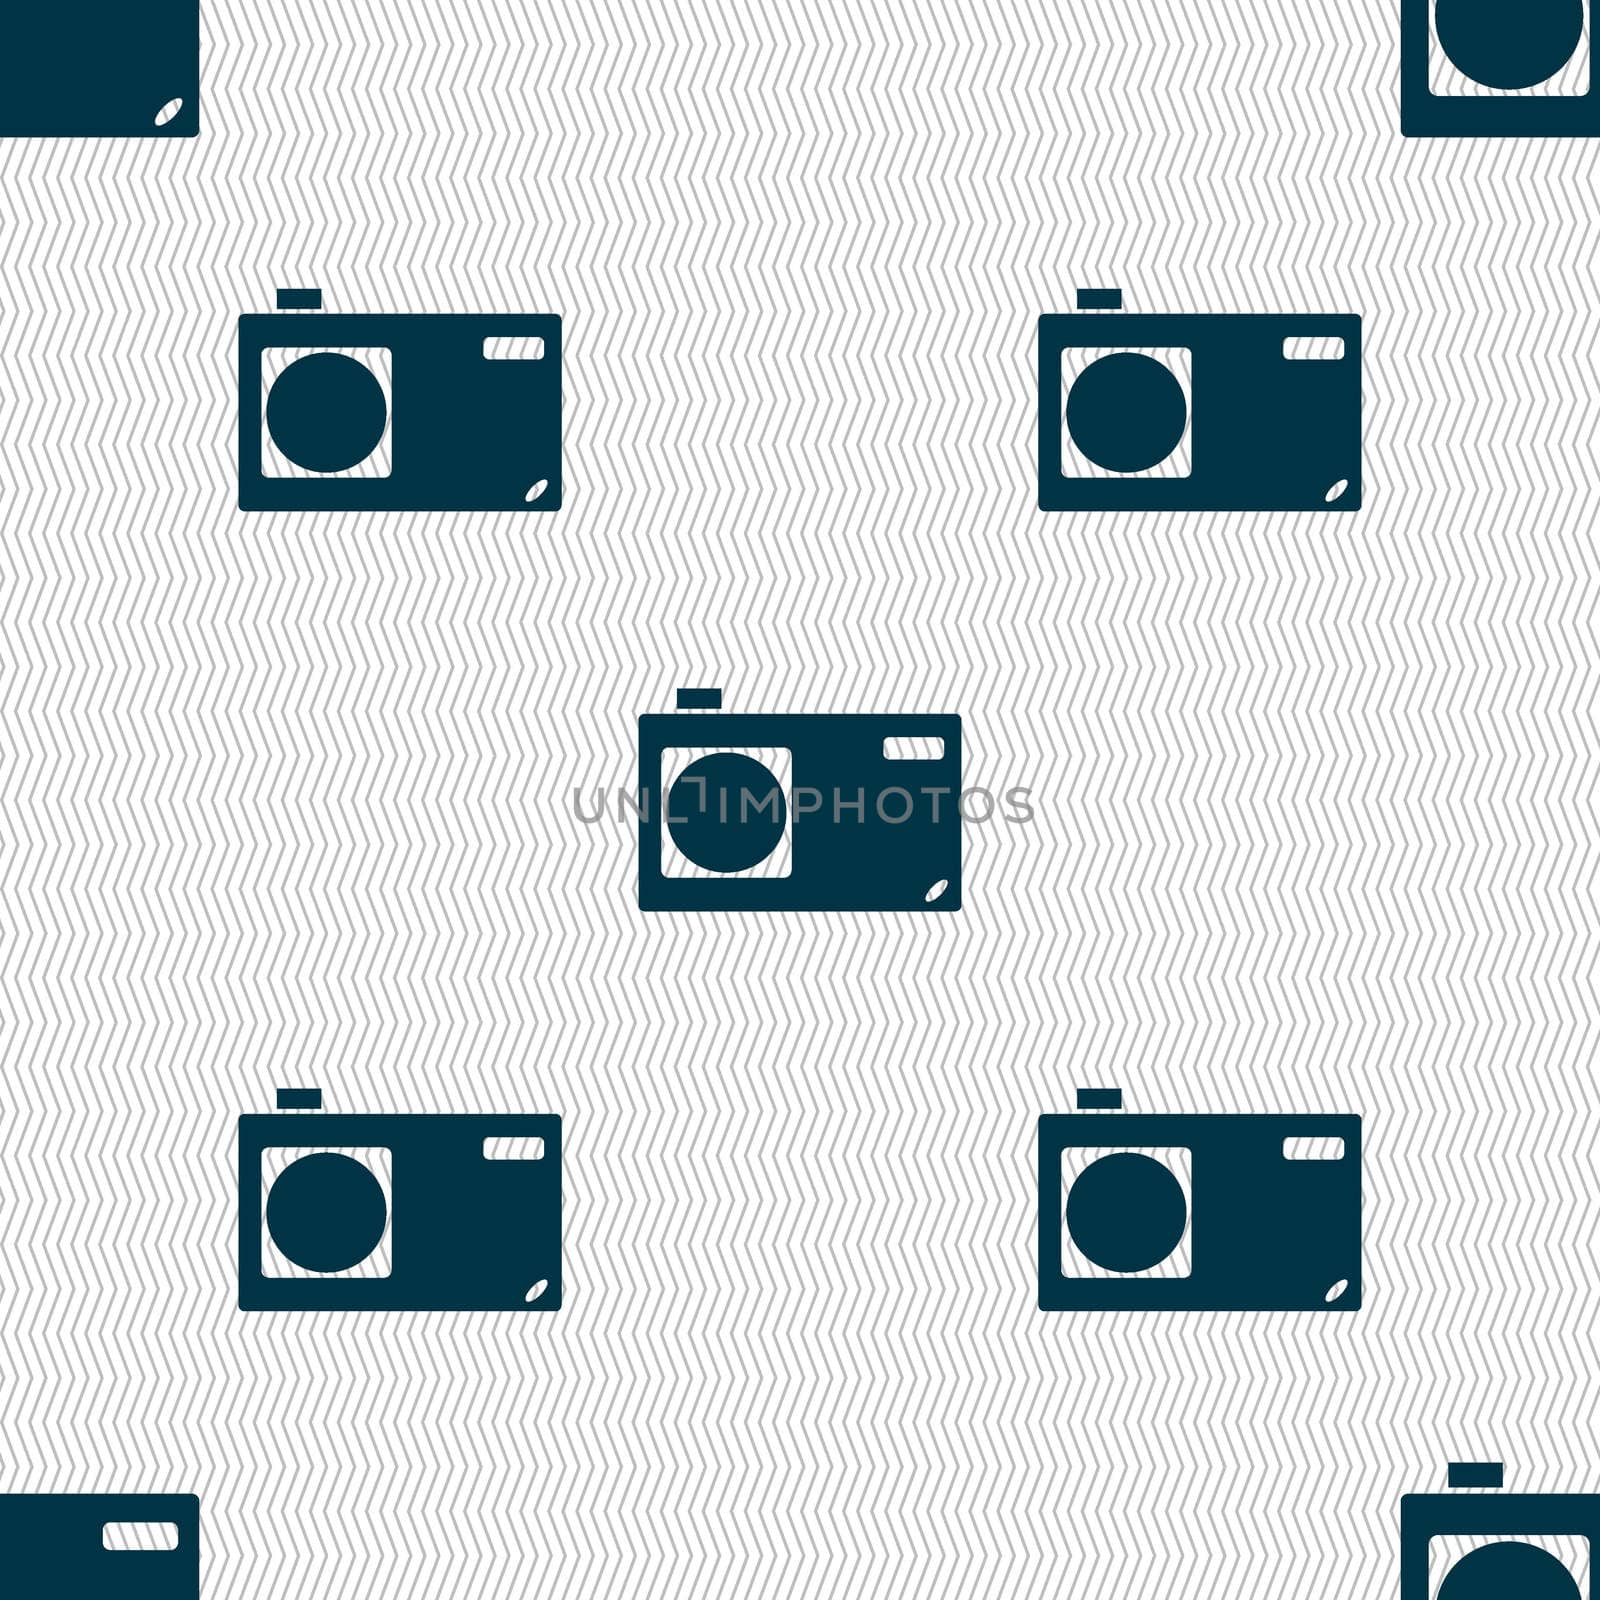 Photo camera sign icon. Digital symbol. Seamless abstract background with geometric shapes. illustration